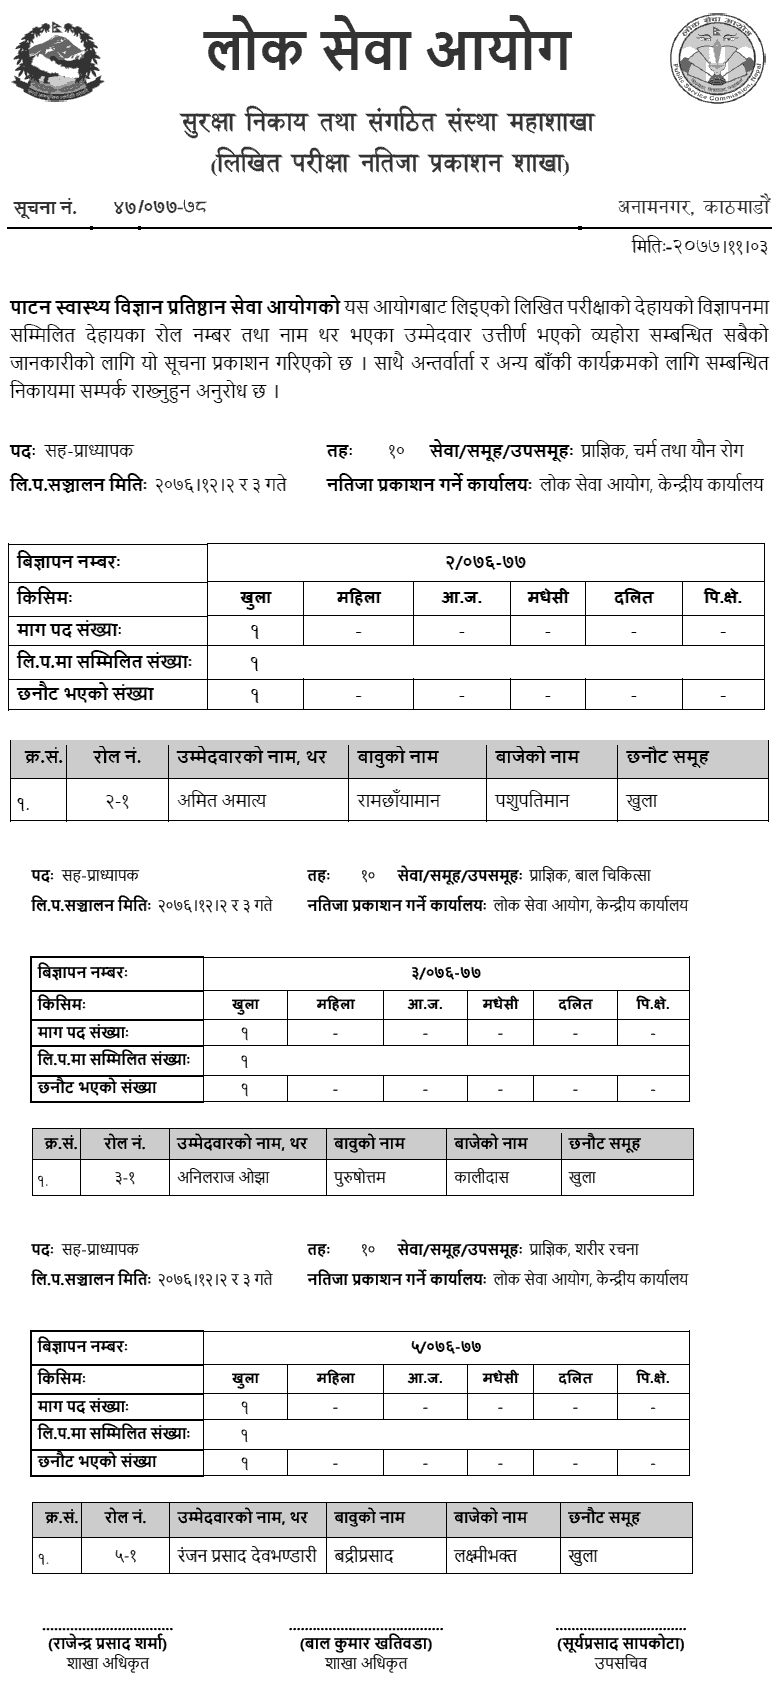 Patan Academy of Health Sciences (PAHS) Written Exam Result of 10th Level